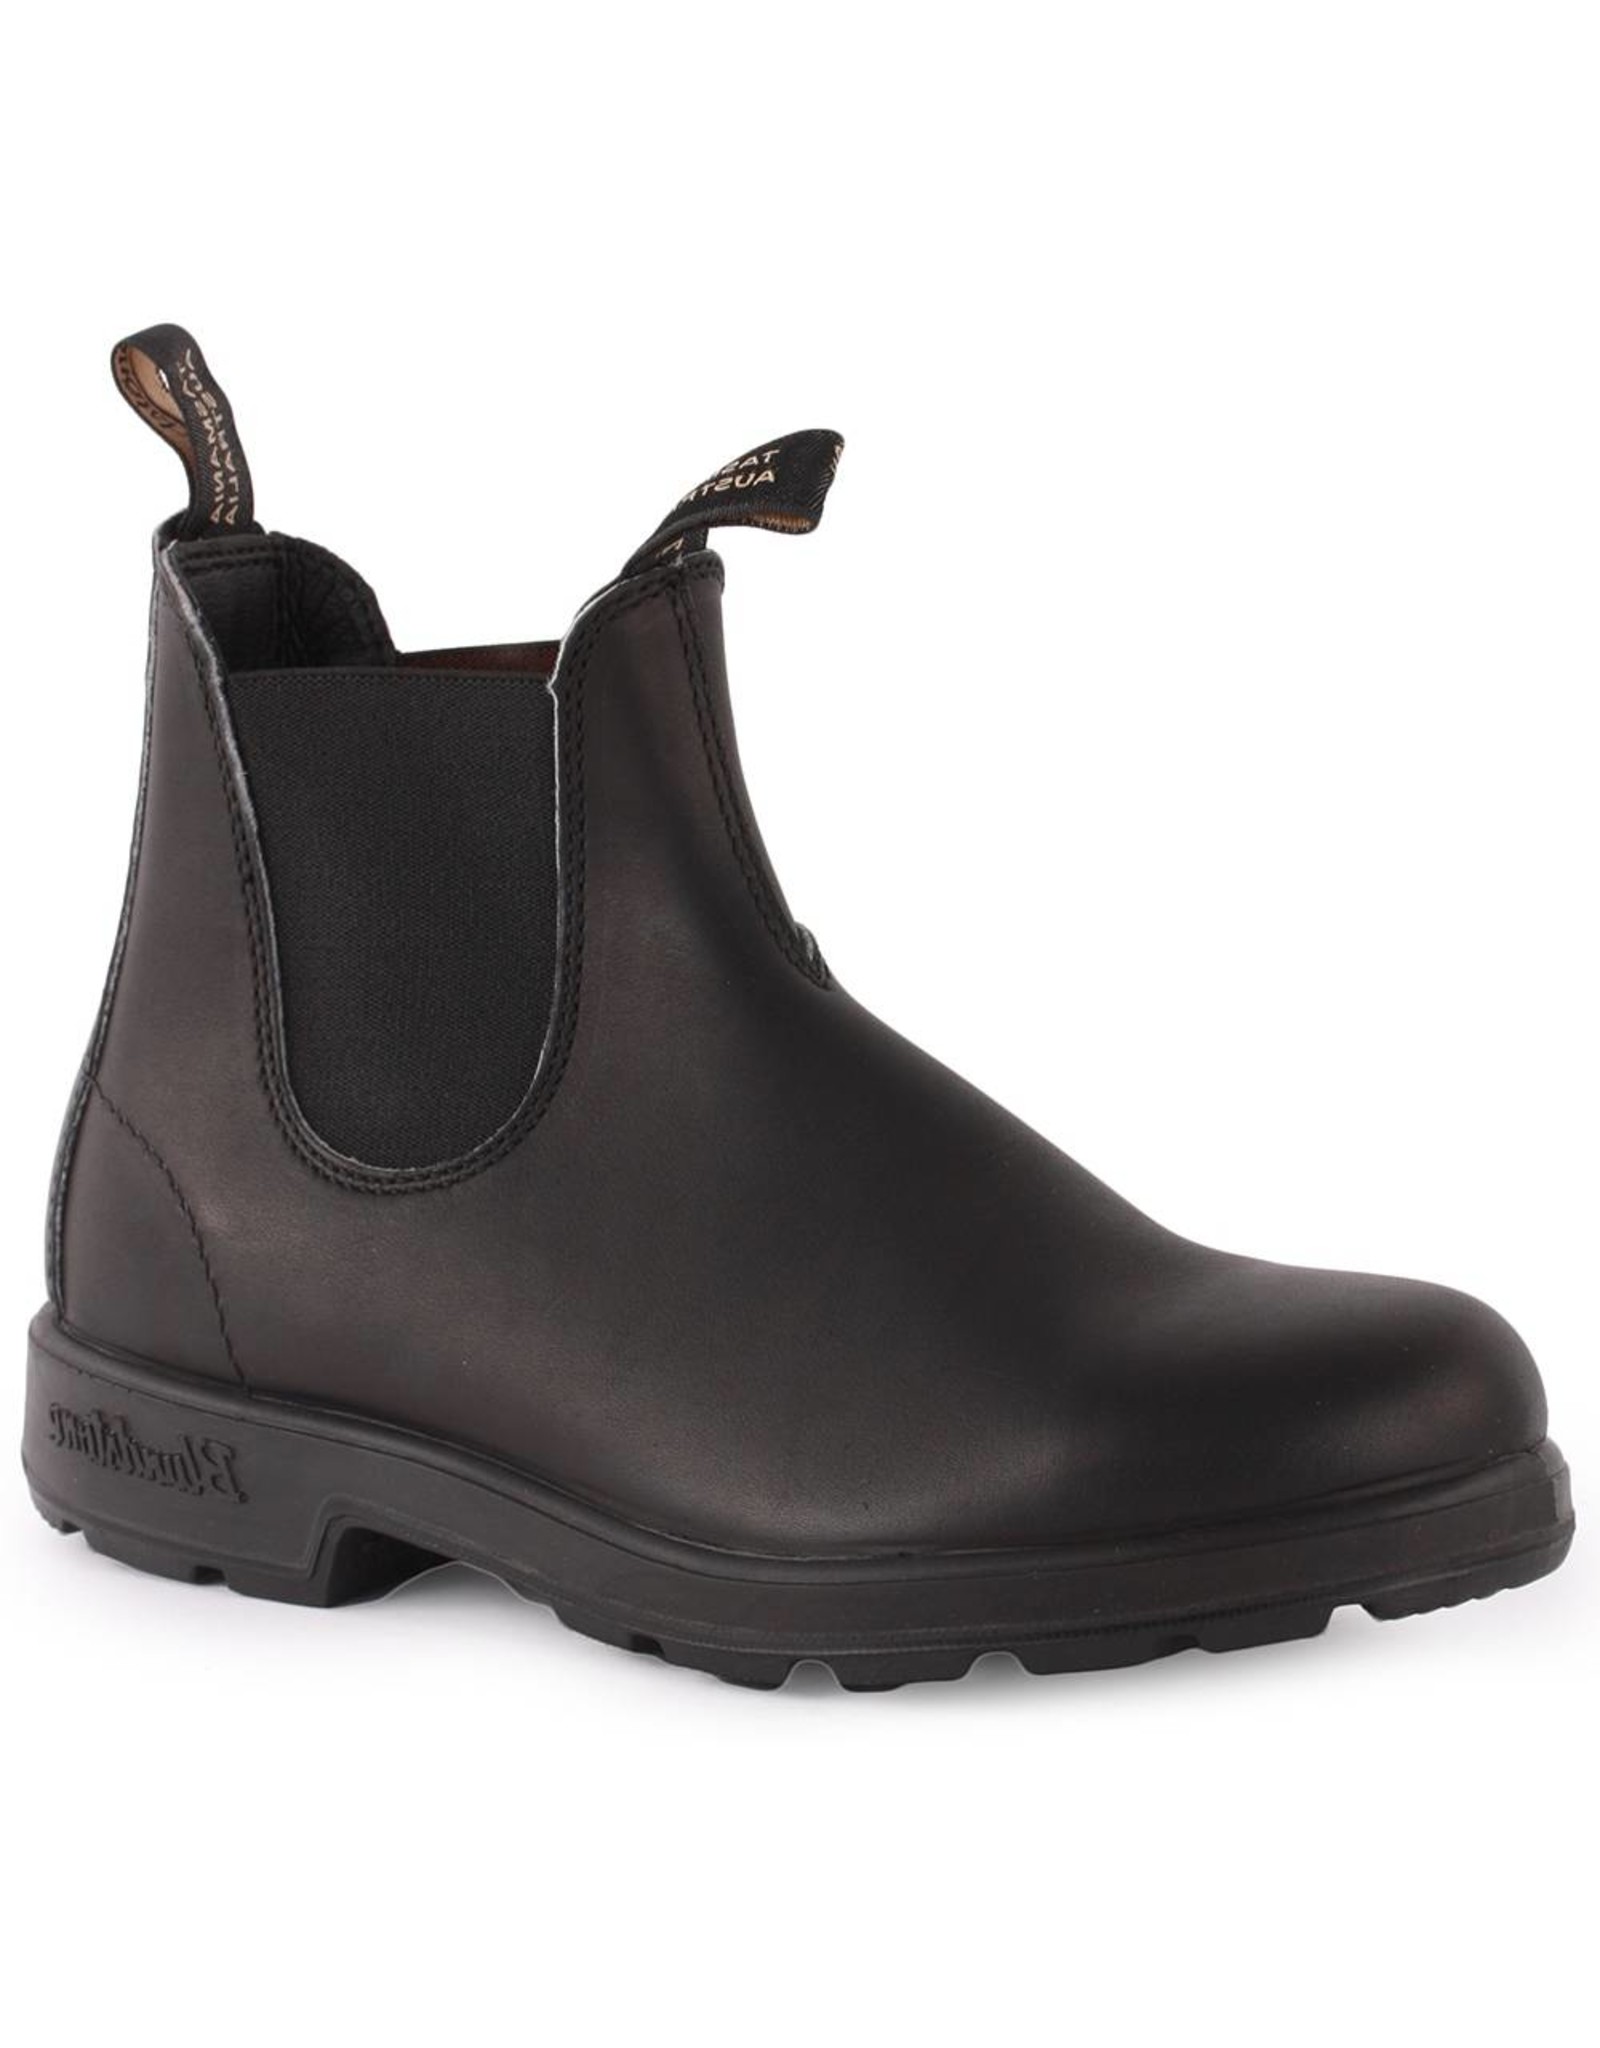 The Blundstone 510 Original Black is one of our most versatile ...